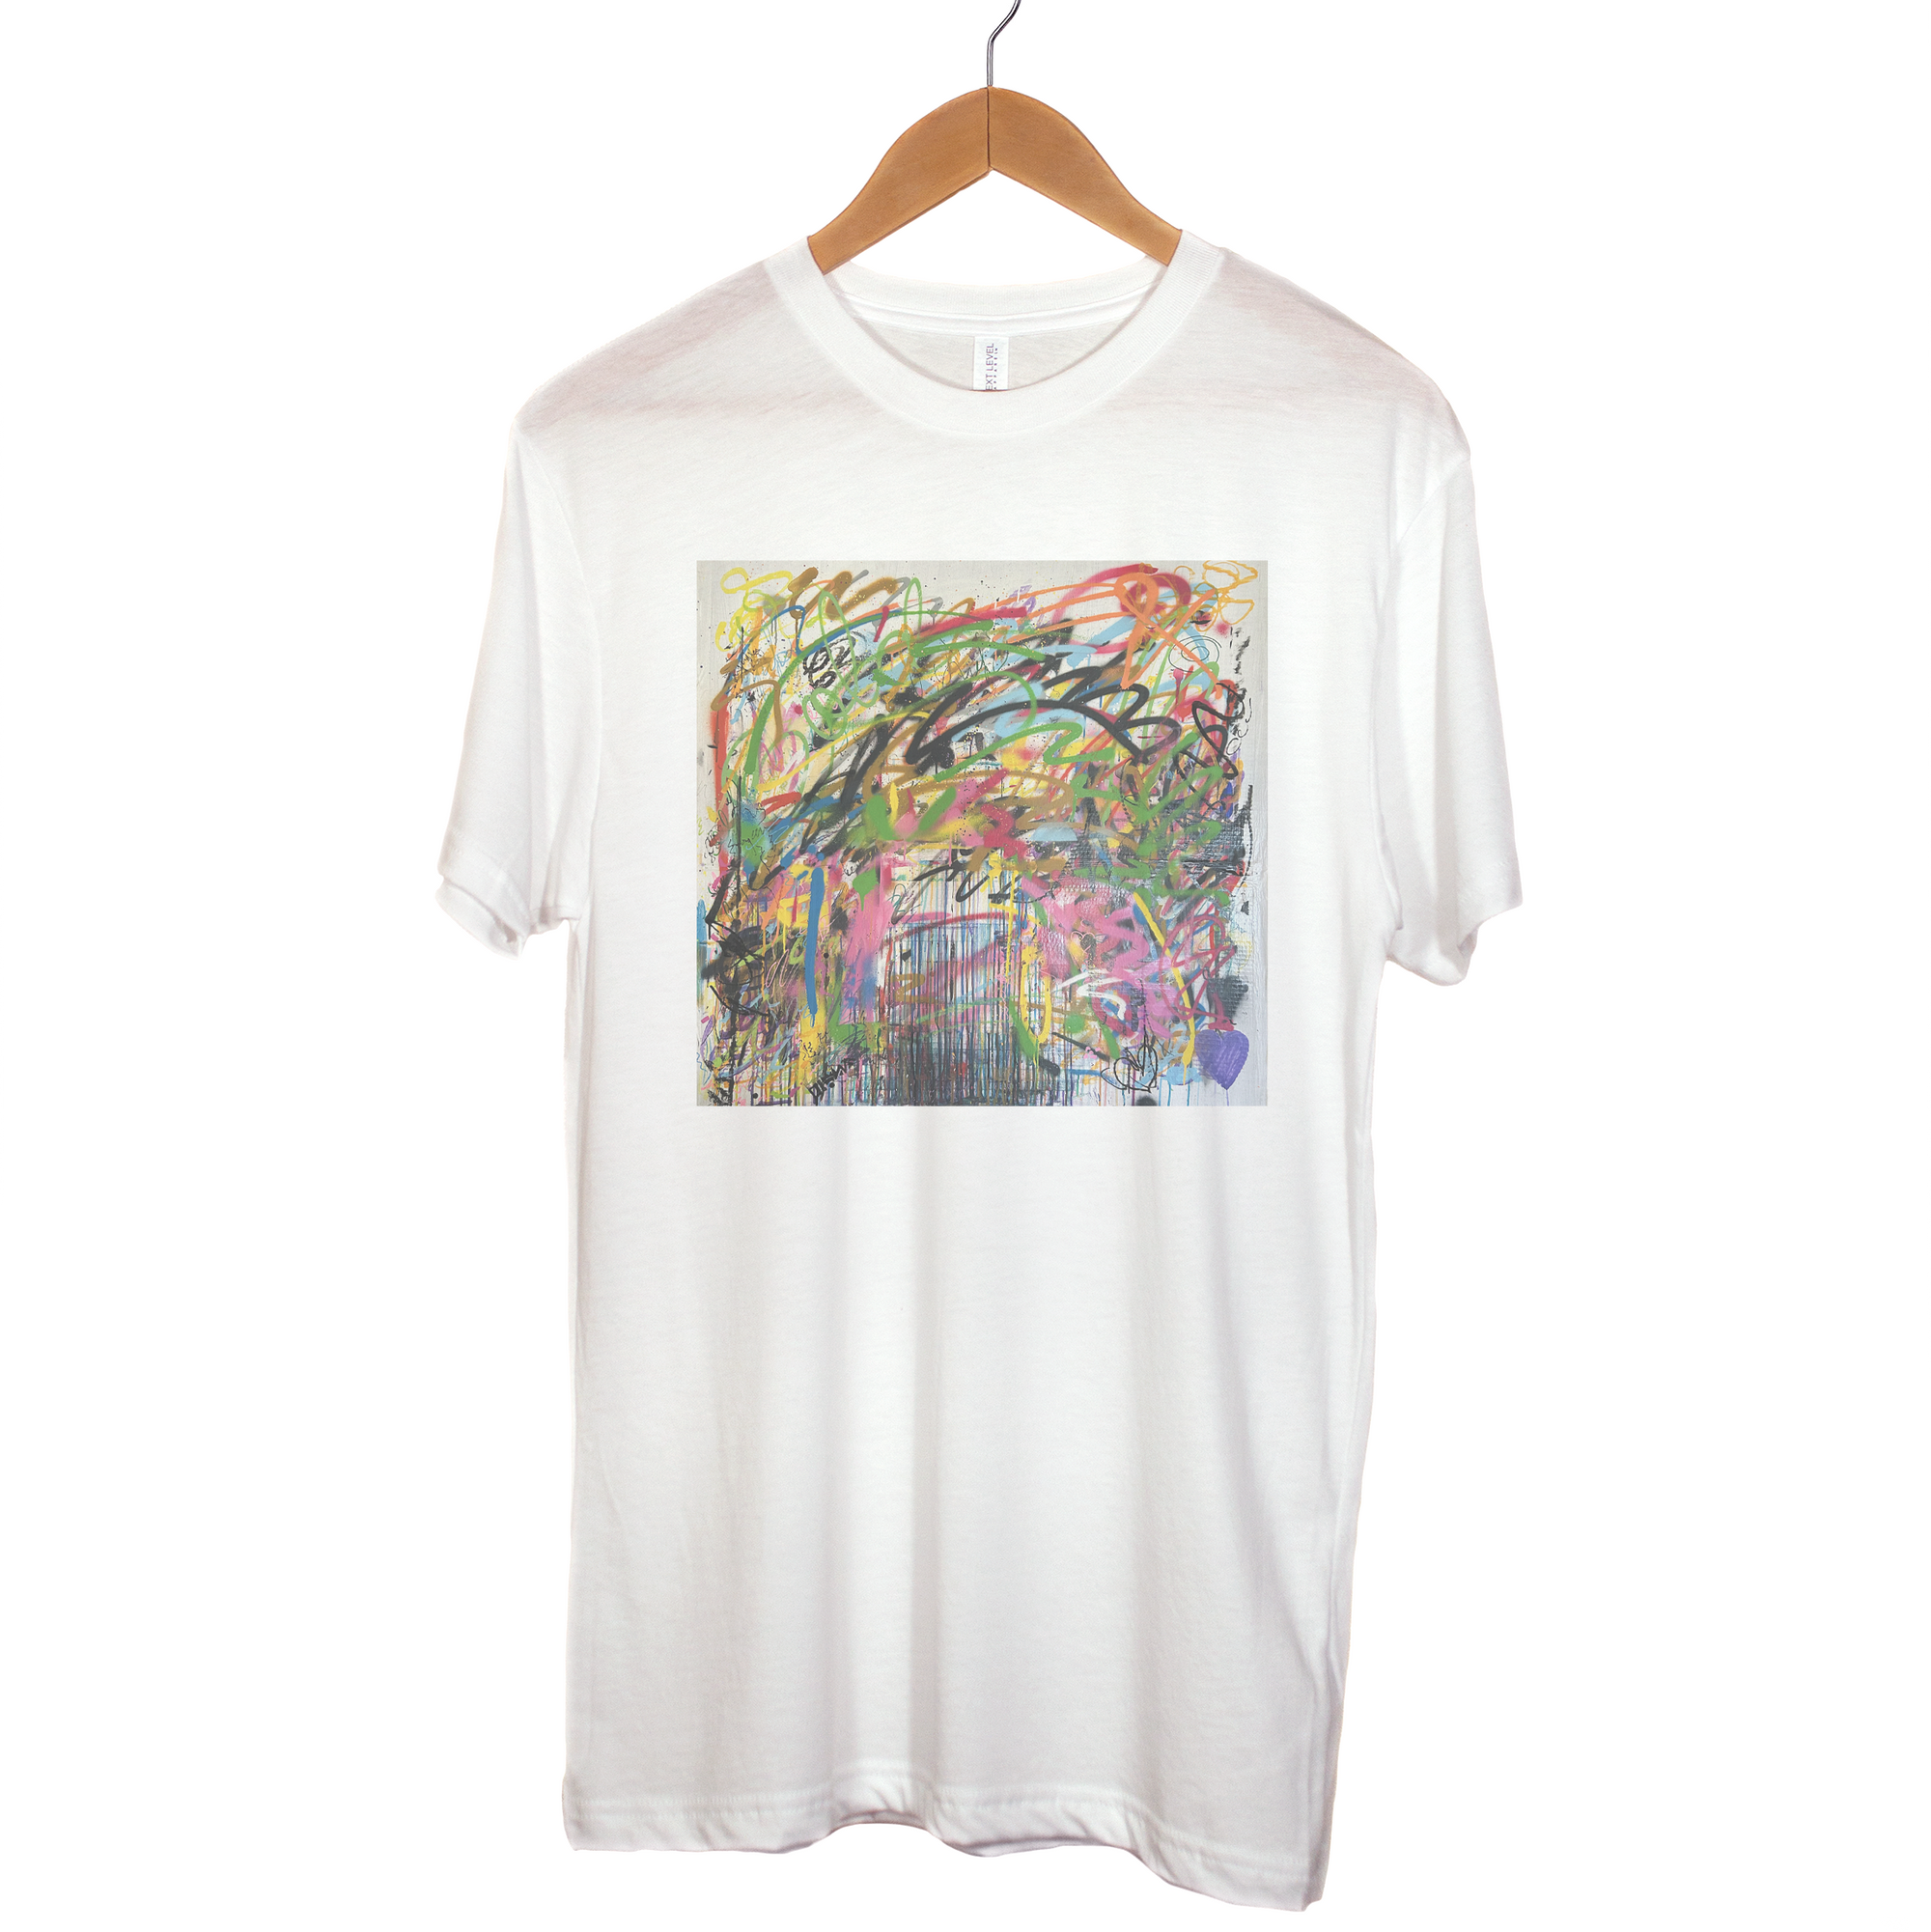 "Heart Of The Past" - Heather/White Triblend Tee